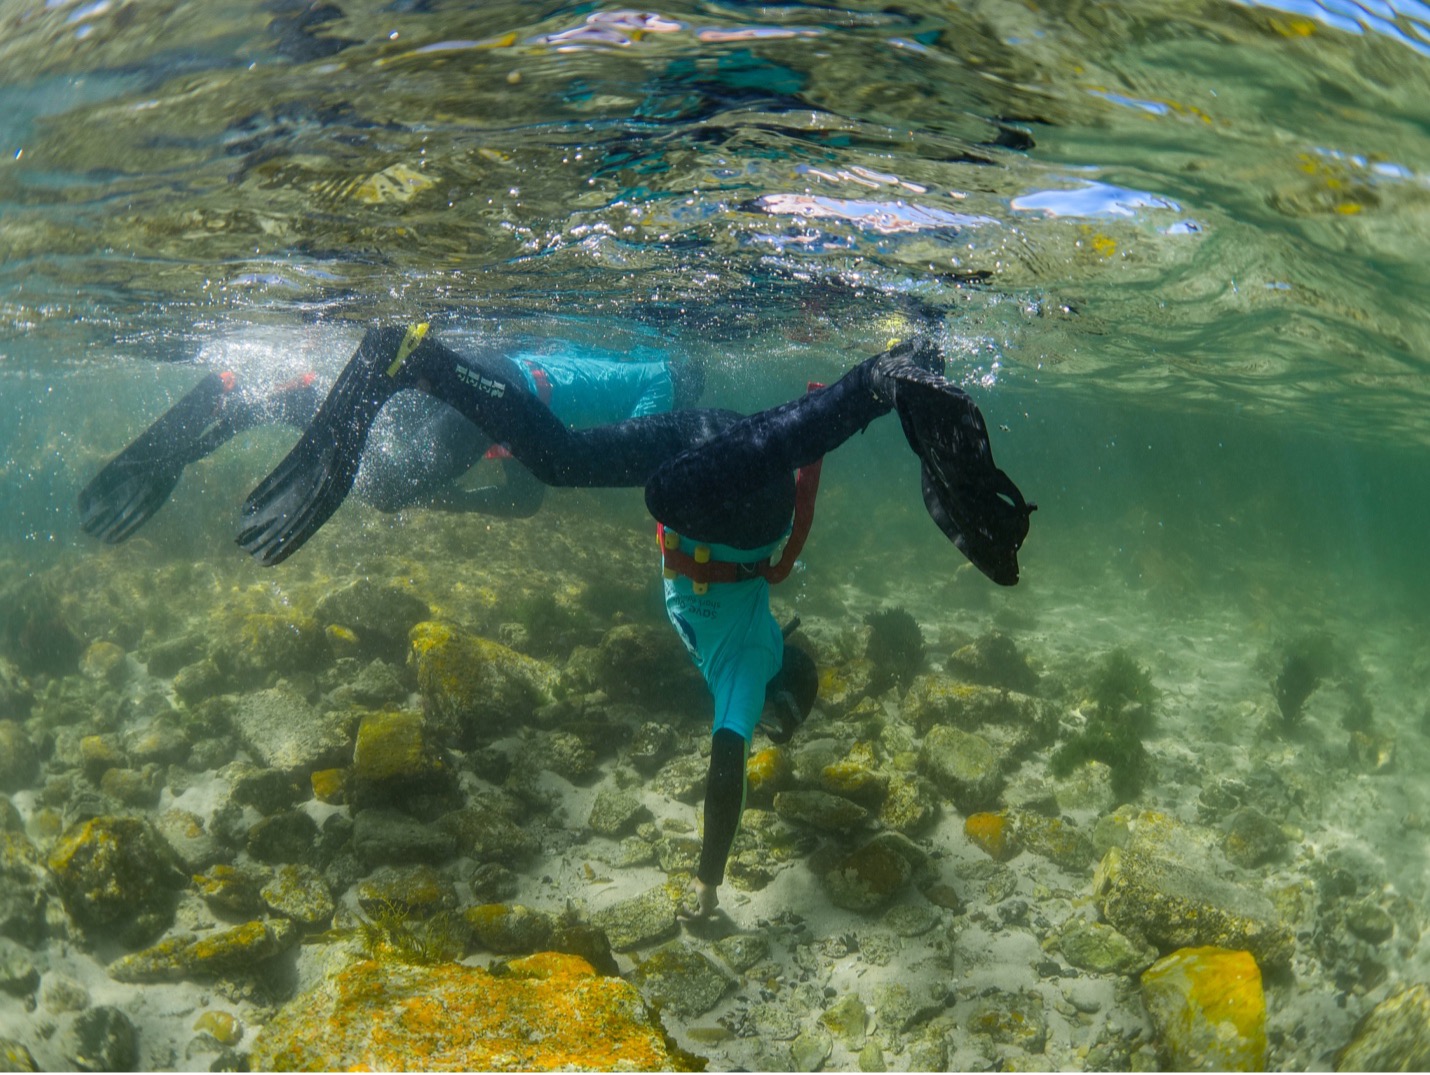 A curious learner diving down to pick up a seashell while snorkelling at the Miller’s Point tidal pool. Image by Danel Wentzel.